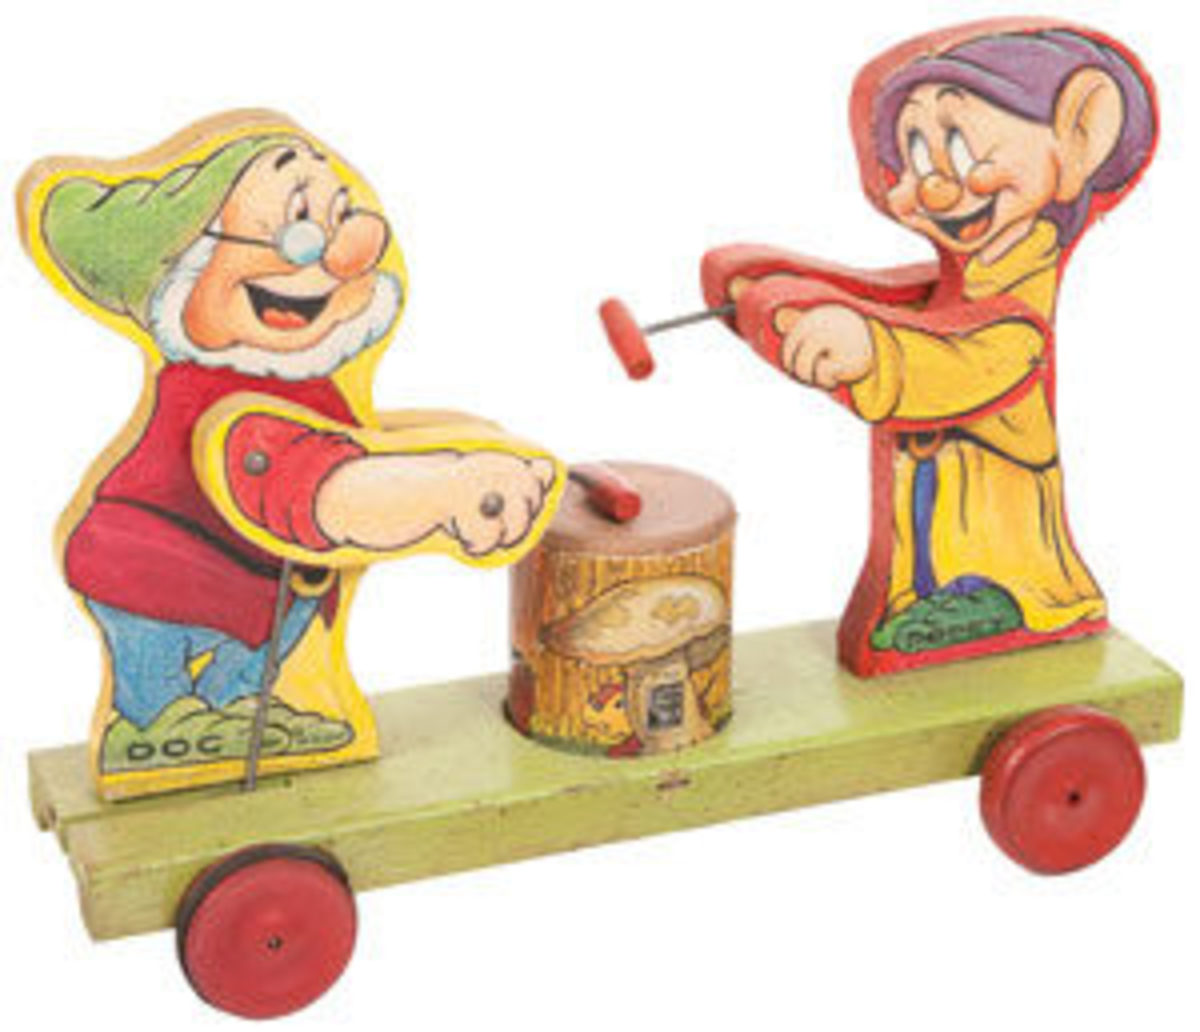  Snow White Doc and Dopey wooden pull/push toy, Fisher Price, 1937. Image courtesy of Heritage Auctions